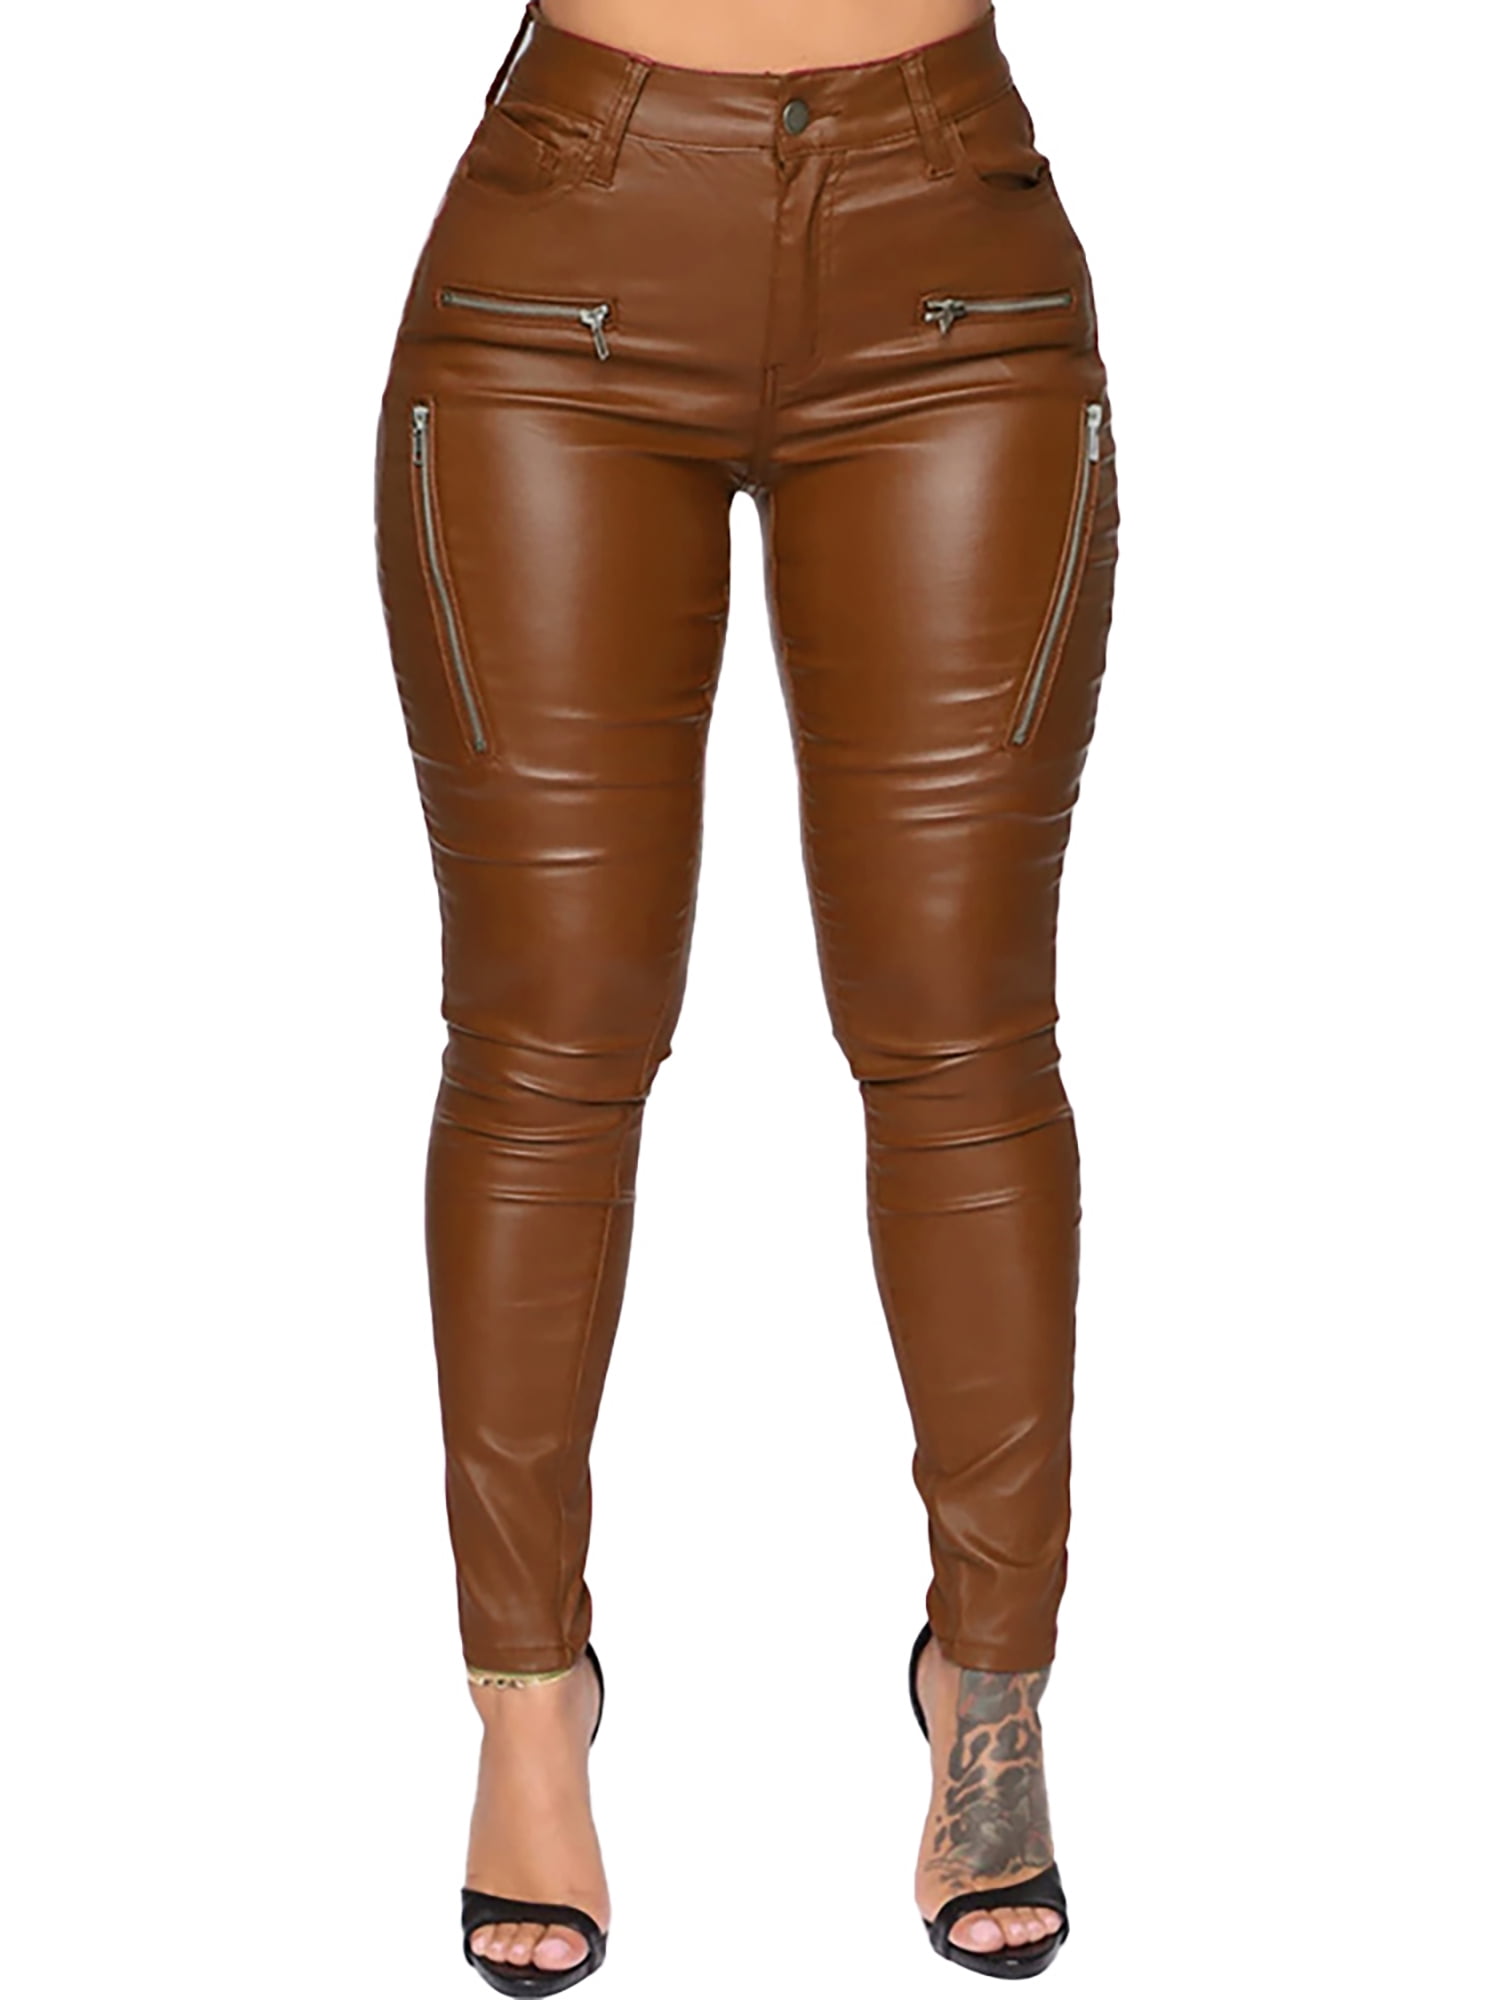 Women Wet Look PU Leather Skinny Leggings High Waisted Stretch Trousers  Pants